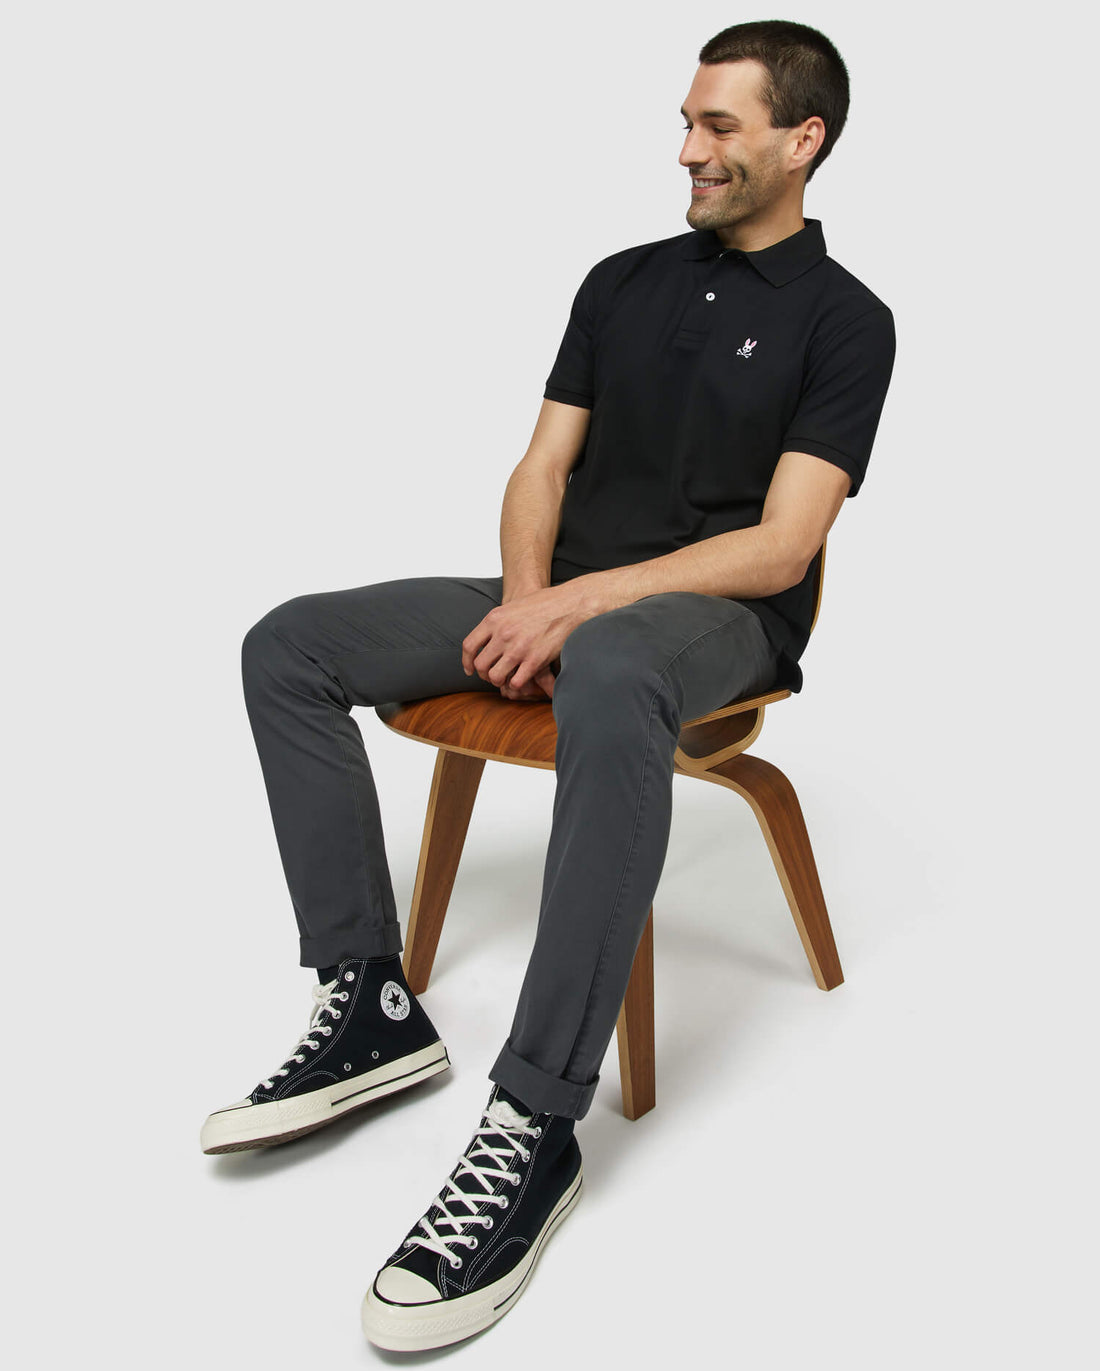 As enduring as time itself: The Classic Black Polo